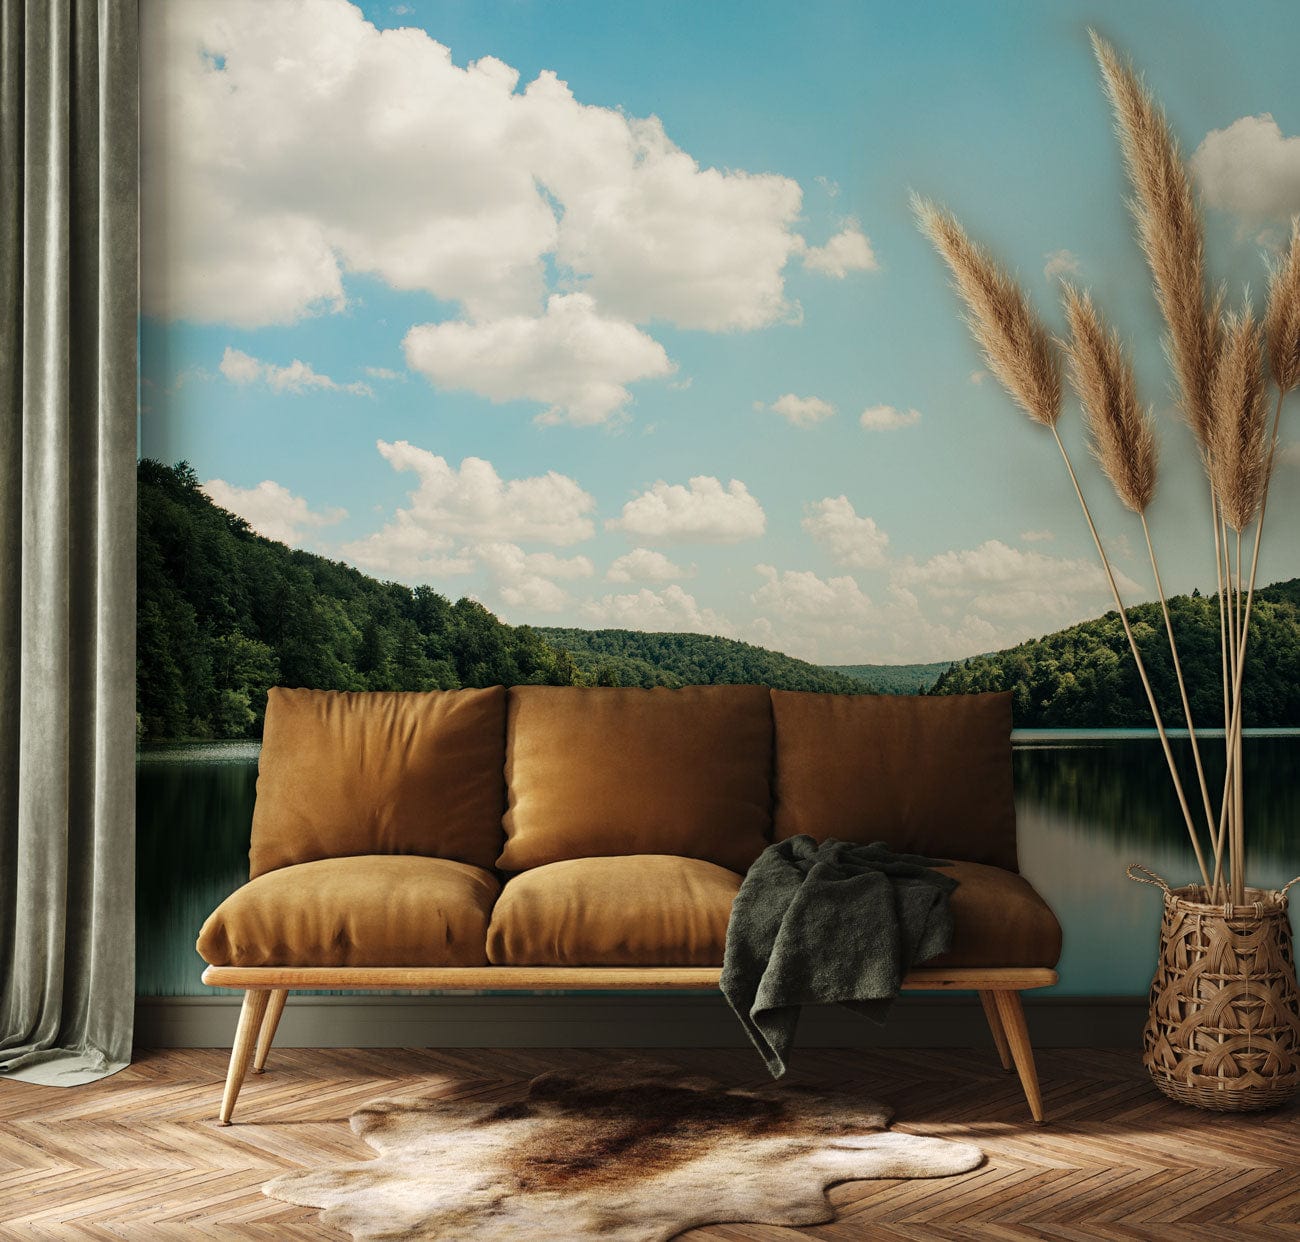 Wallpaper Mural for Living Room Decor Featuring the Scenery of the Sea of Clouds at Peak